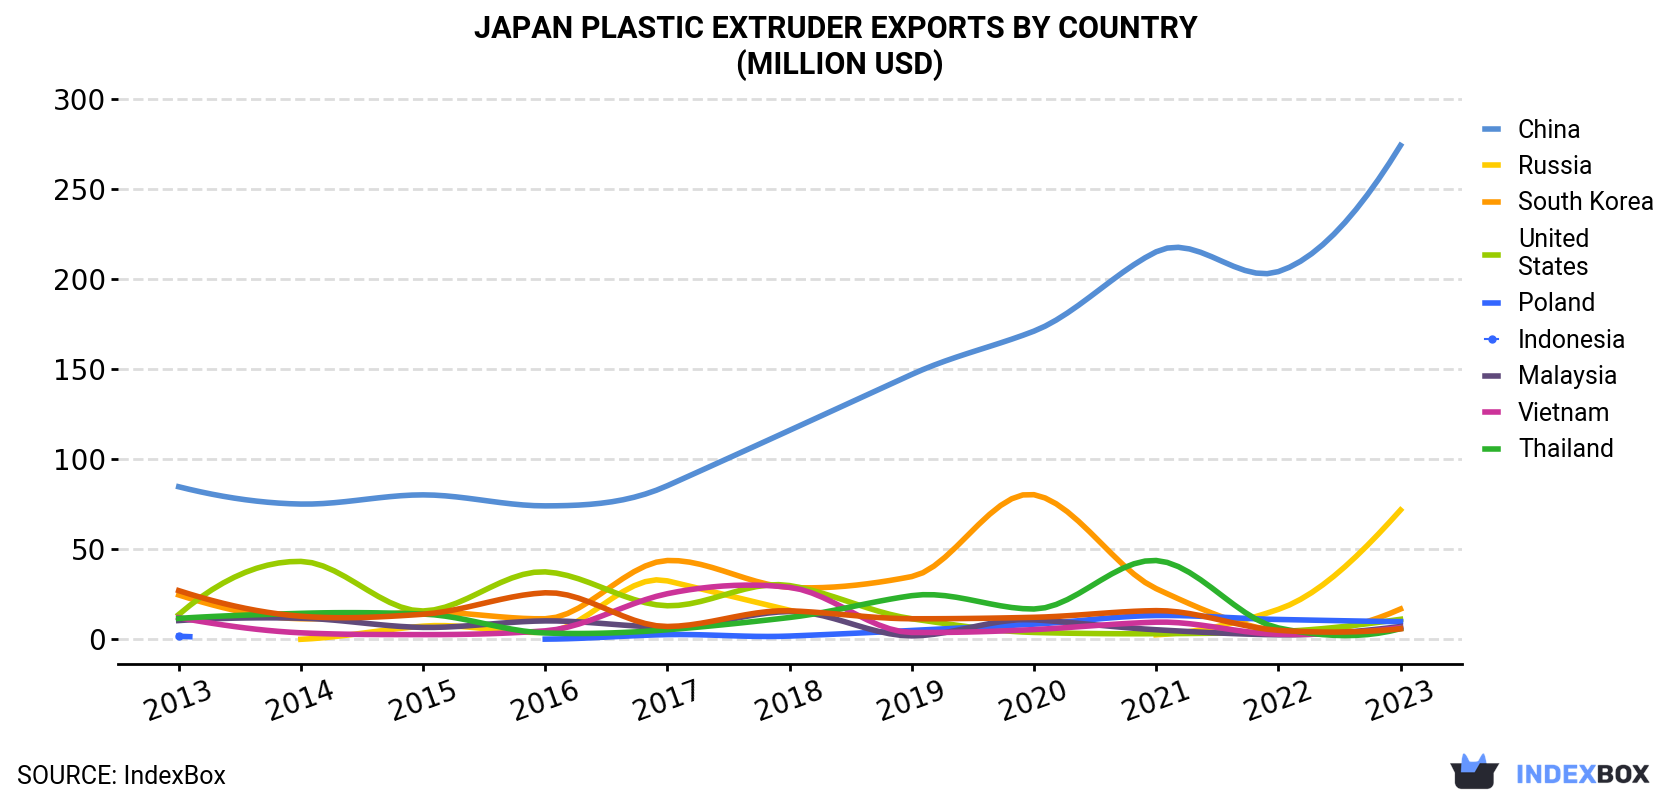 Japan Plastic Extruder Exports By Country (Million USD)